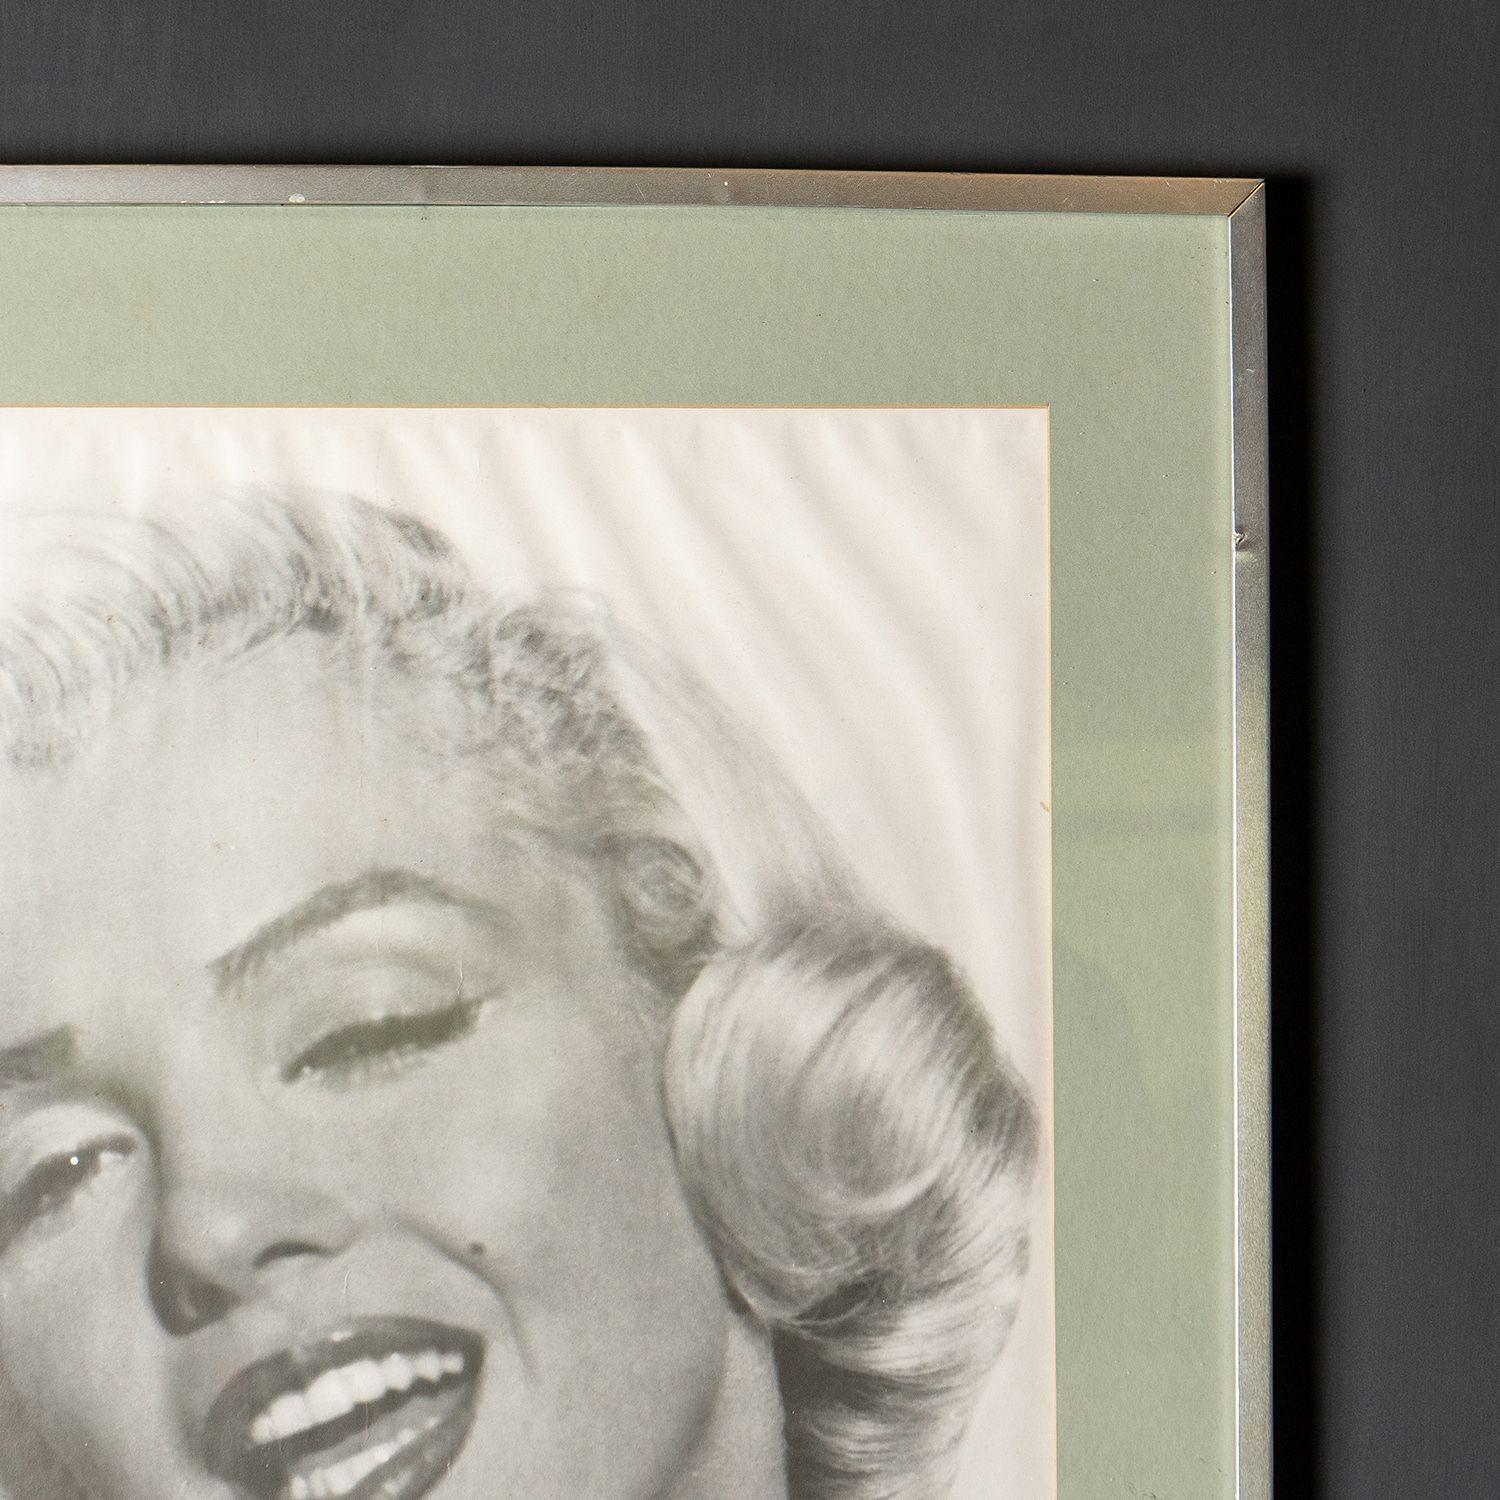 Large Vintage Marilyn Monroe Photographic Portrait Print by Frank Powolny, 1970s For Sale 1